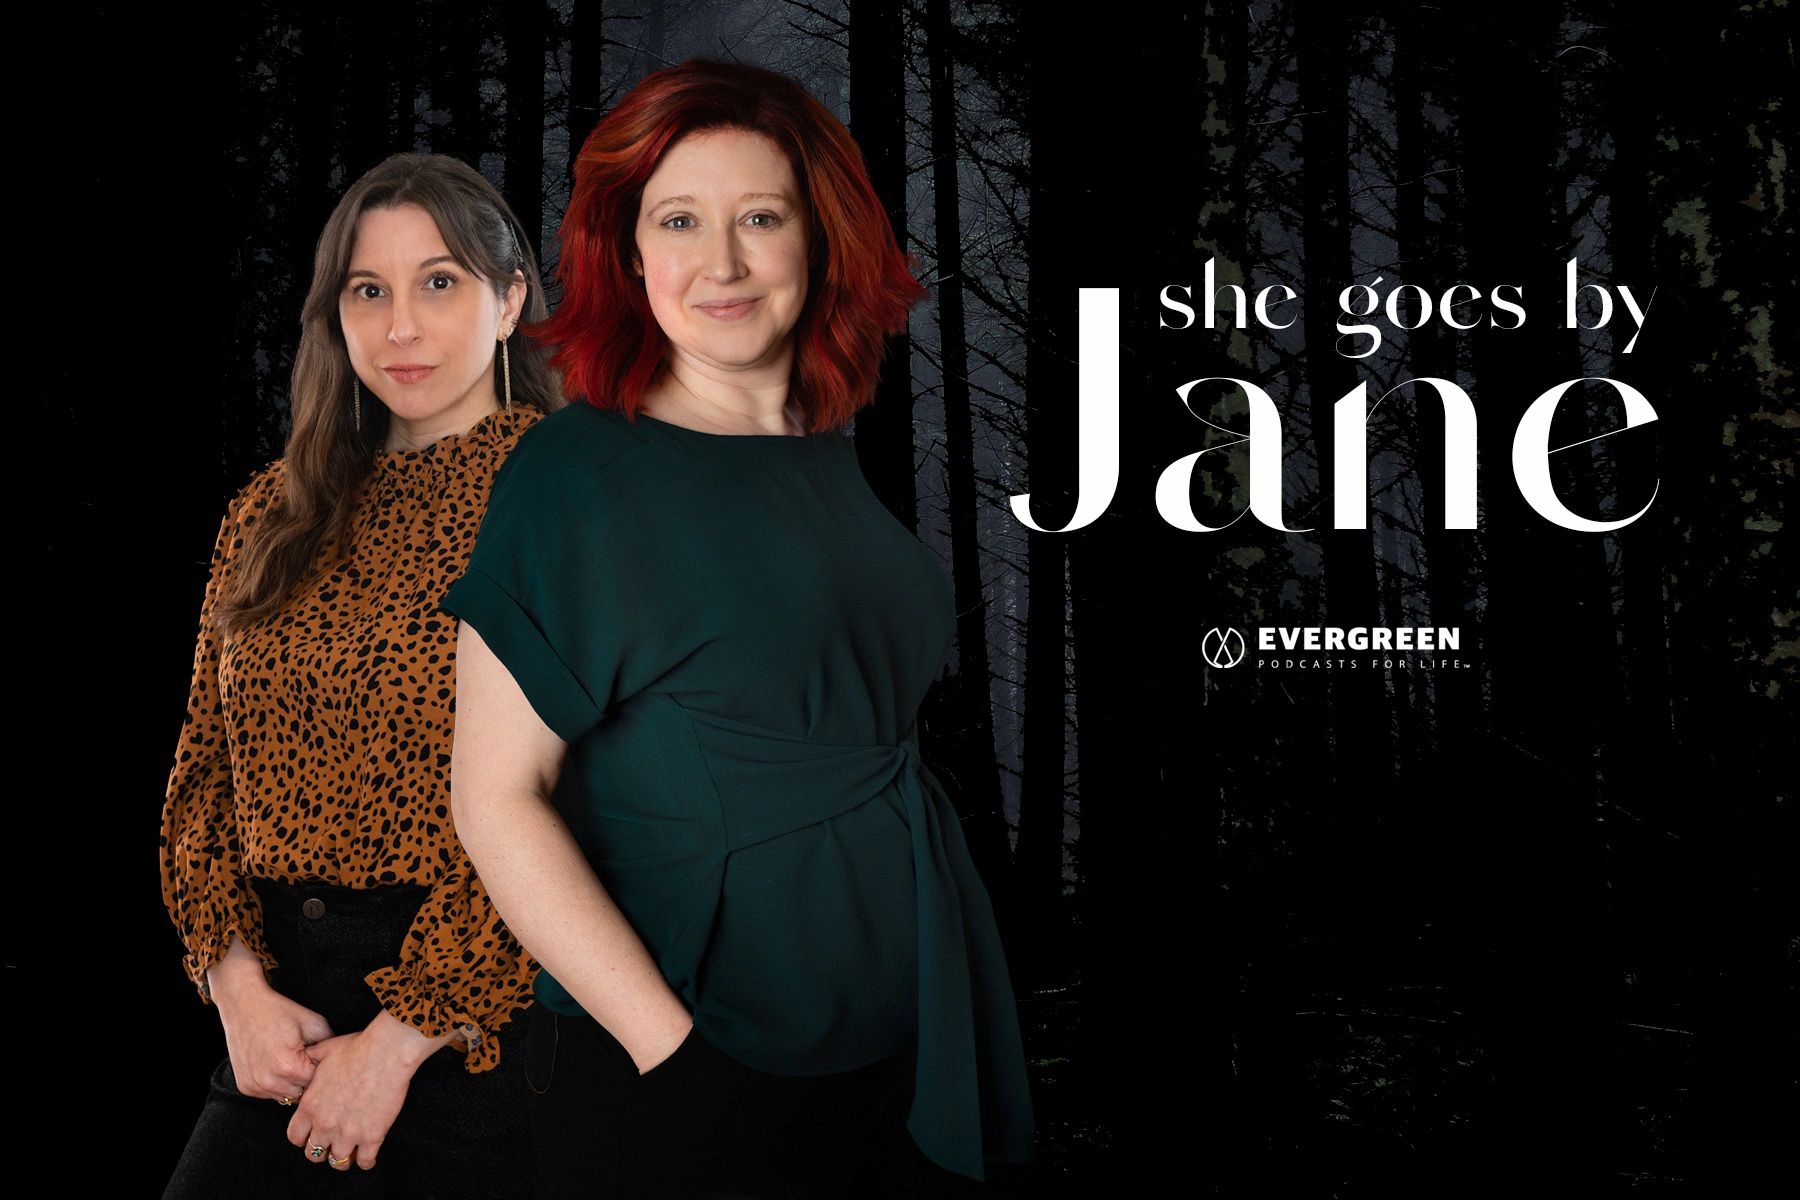 She Goes By Jane on Apple Podcasts